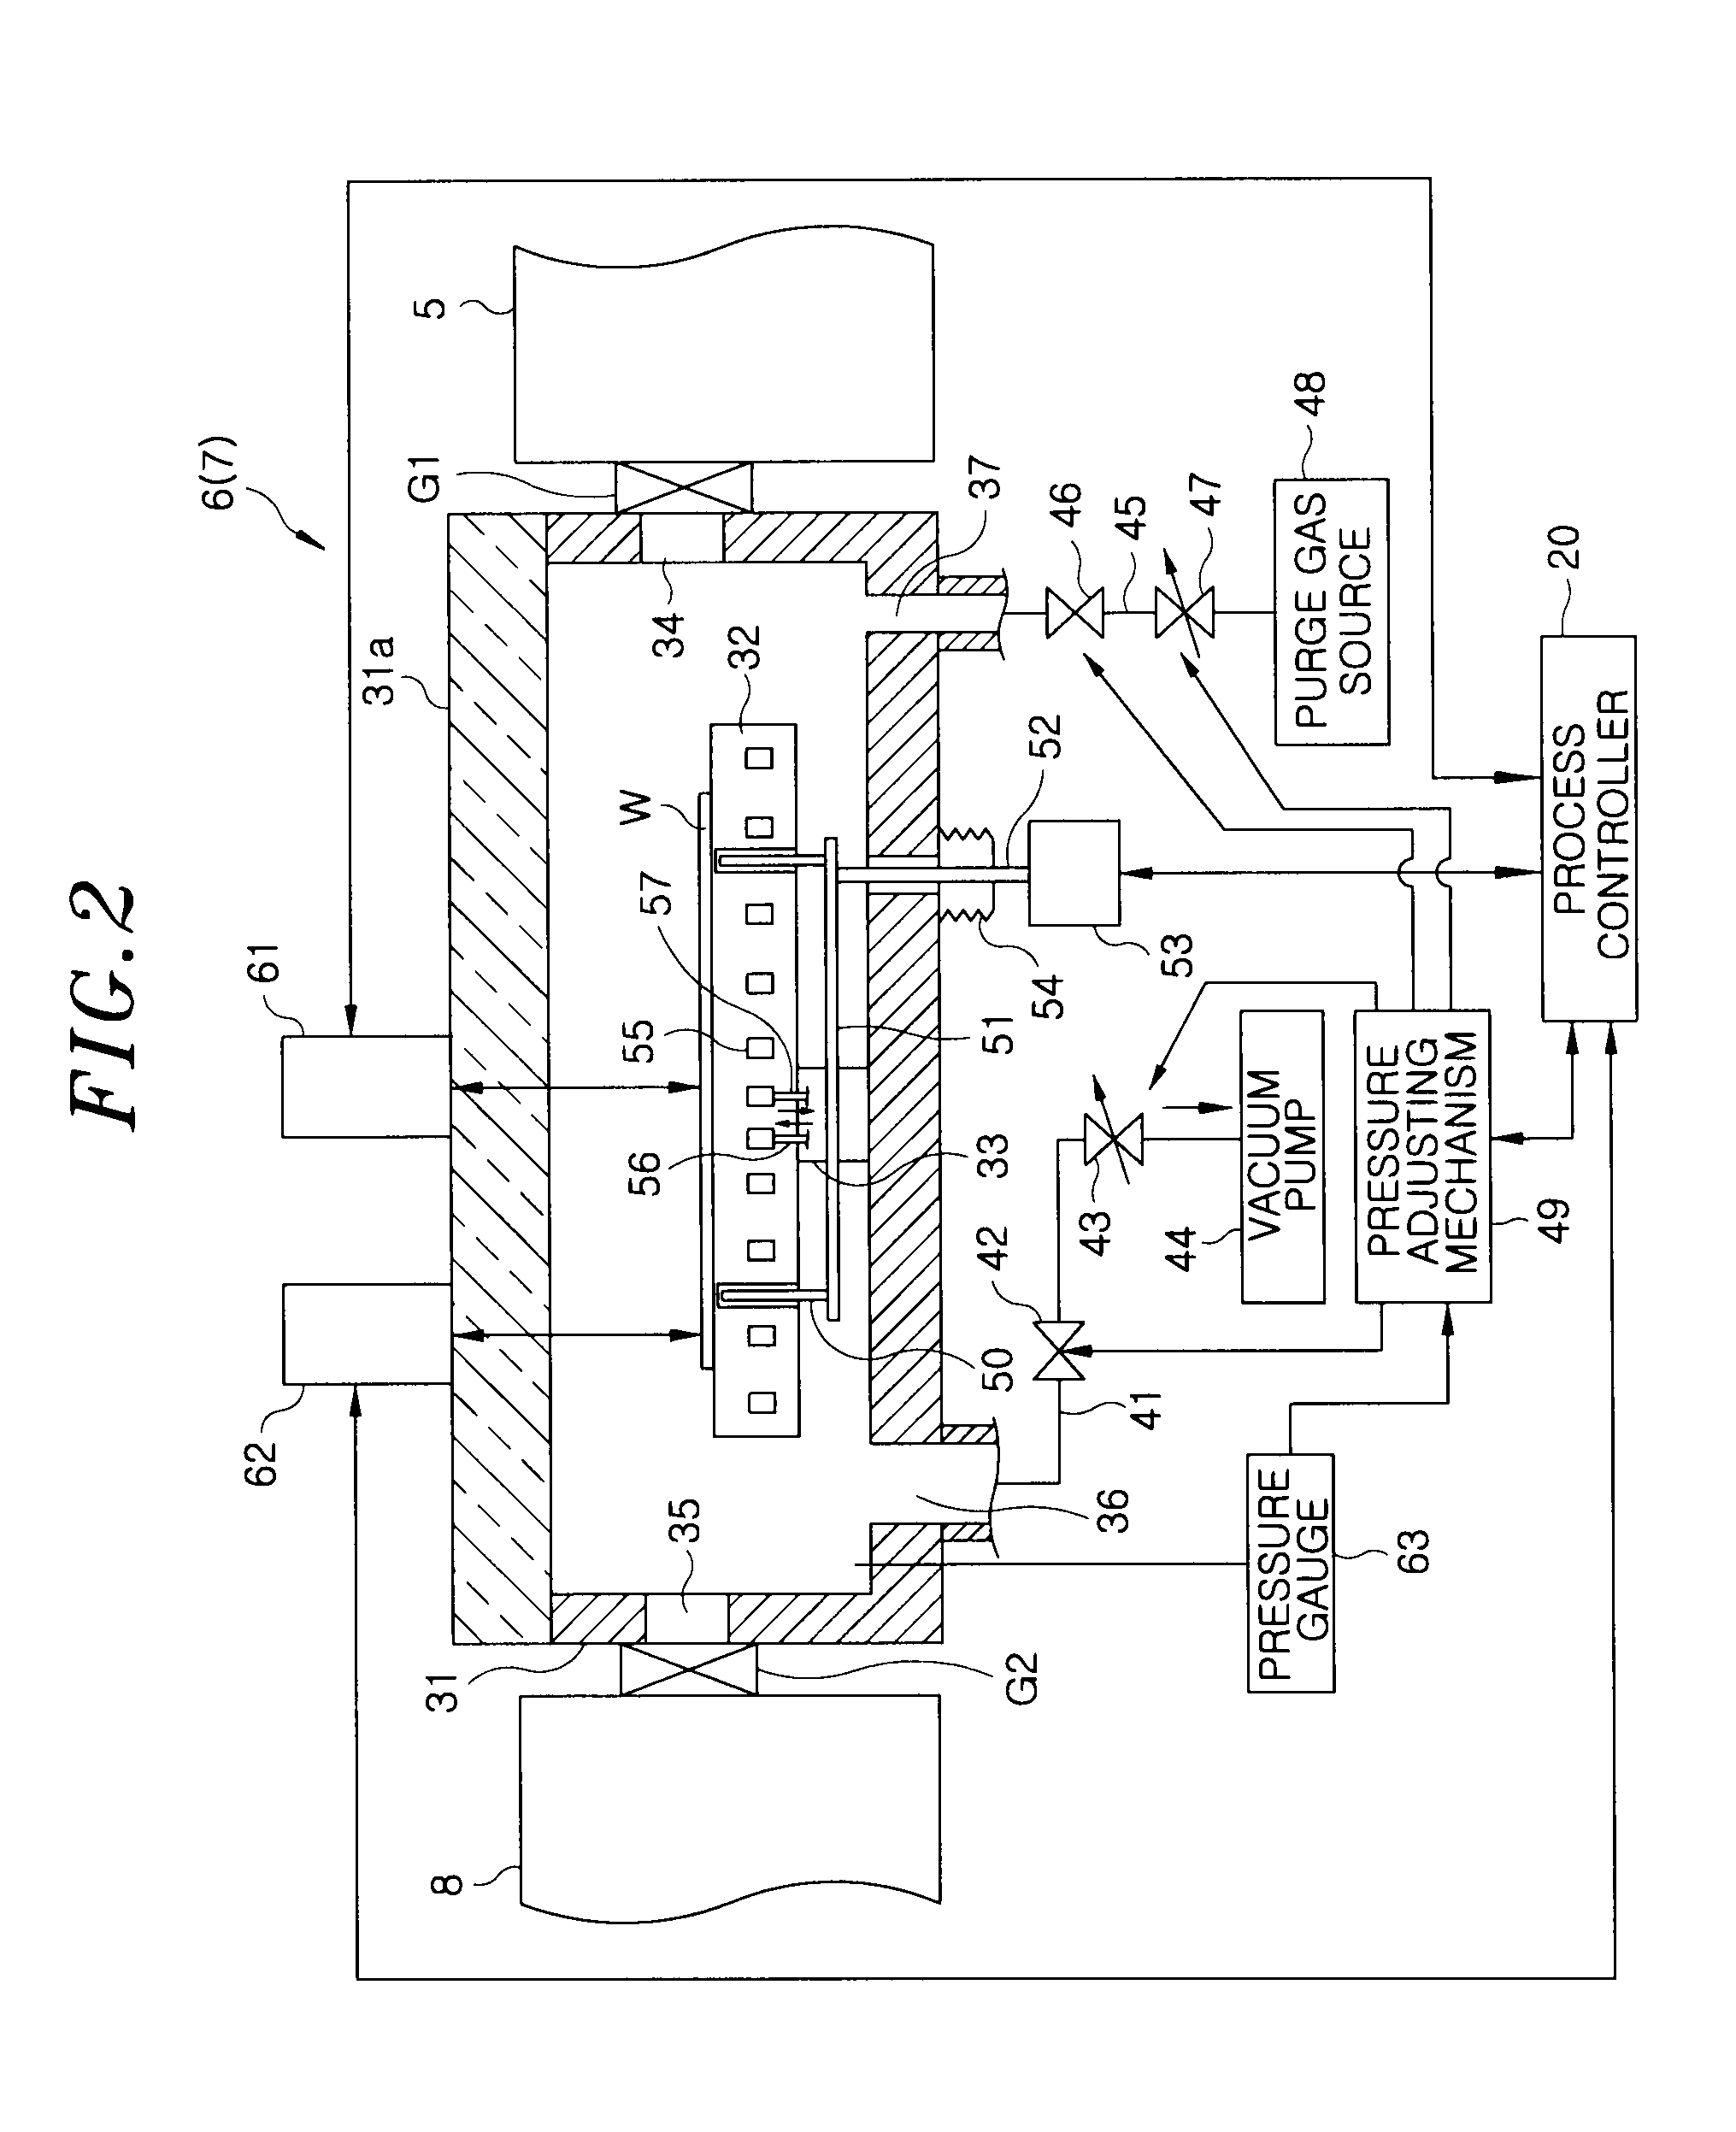 Load-lock apparatus and substrate cooling method